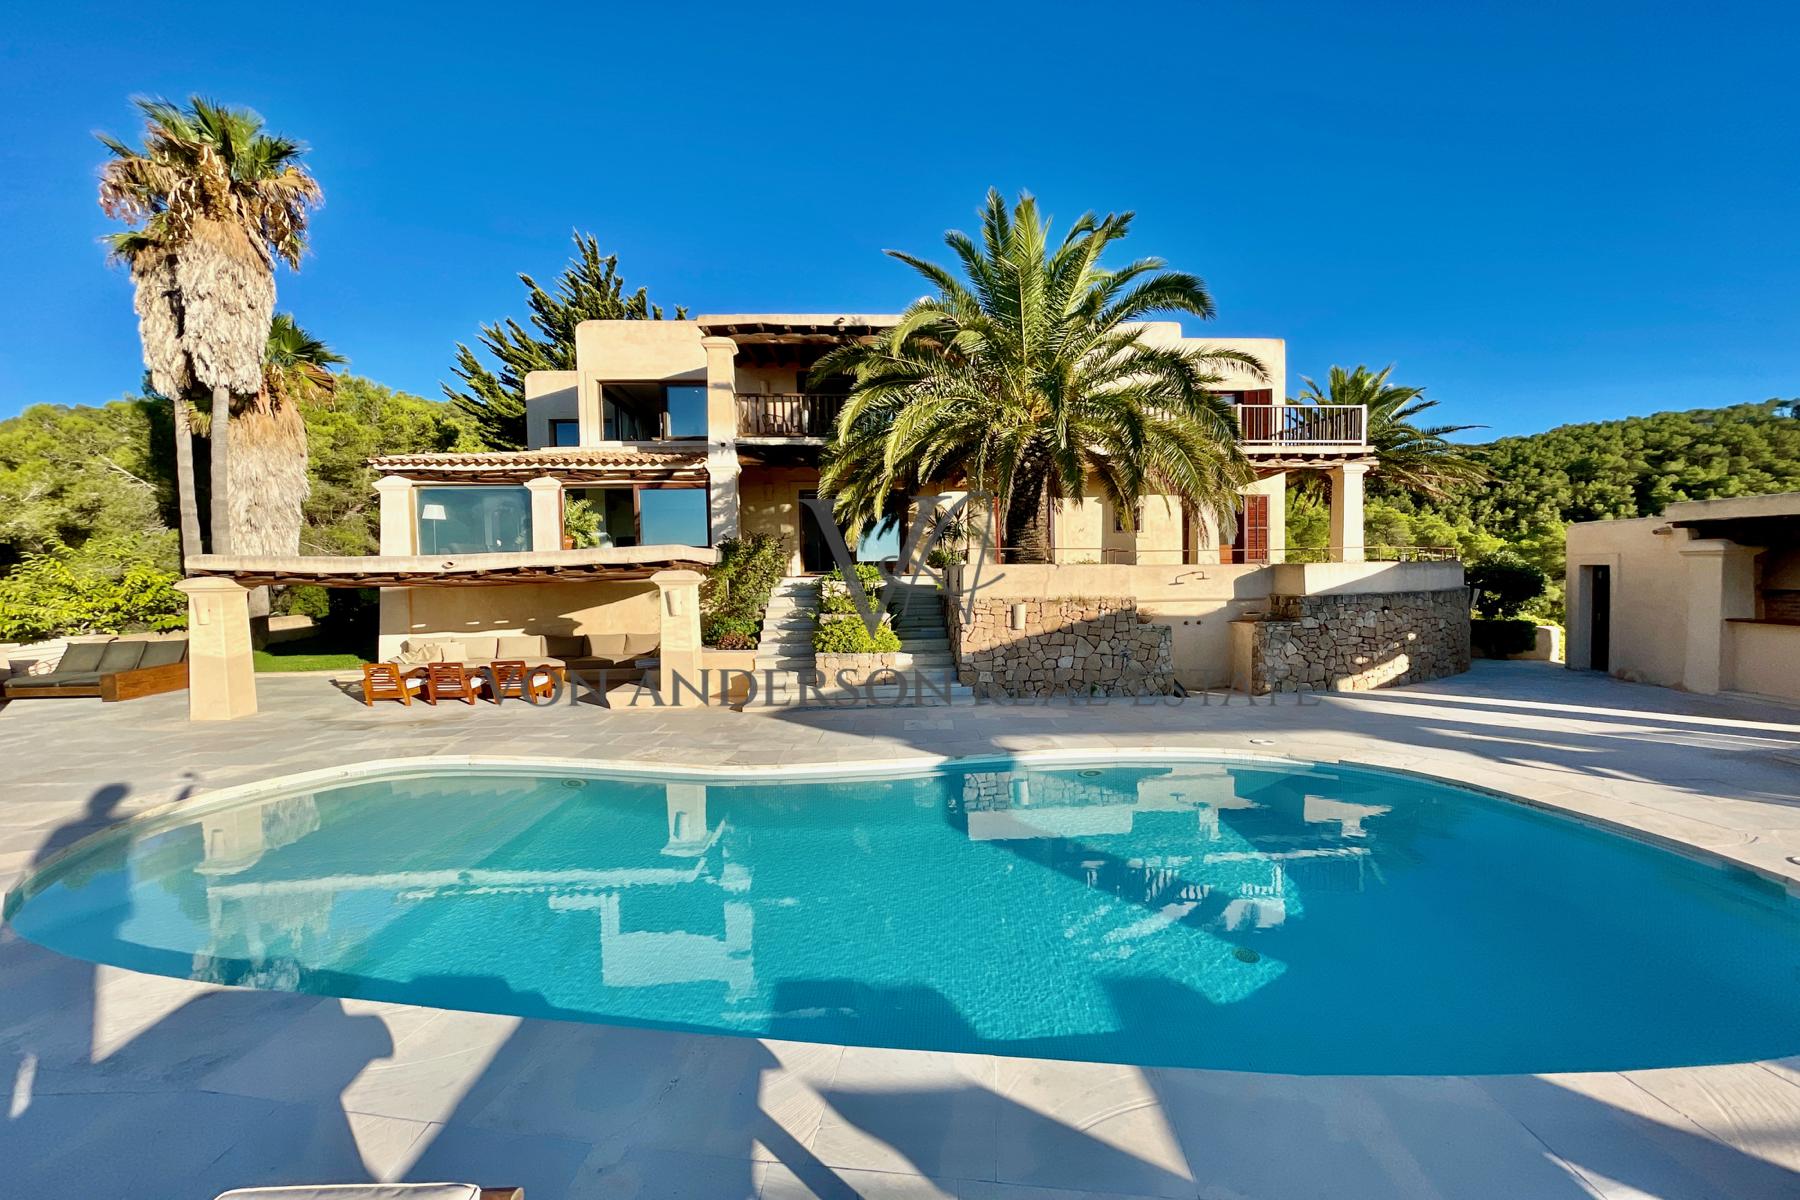 Magnificent Villa with Tourist License and Stunning Sea & Sunset Views, ref. VA1004, for sale in Ibiza by Von Anderson Real Estate